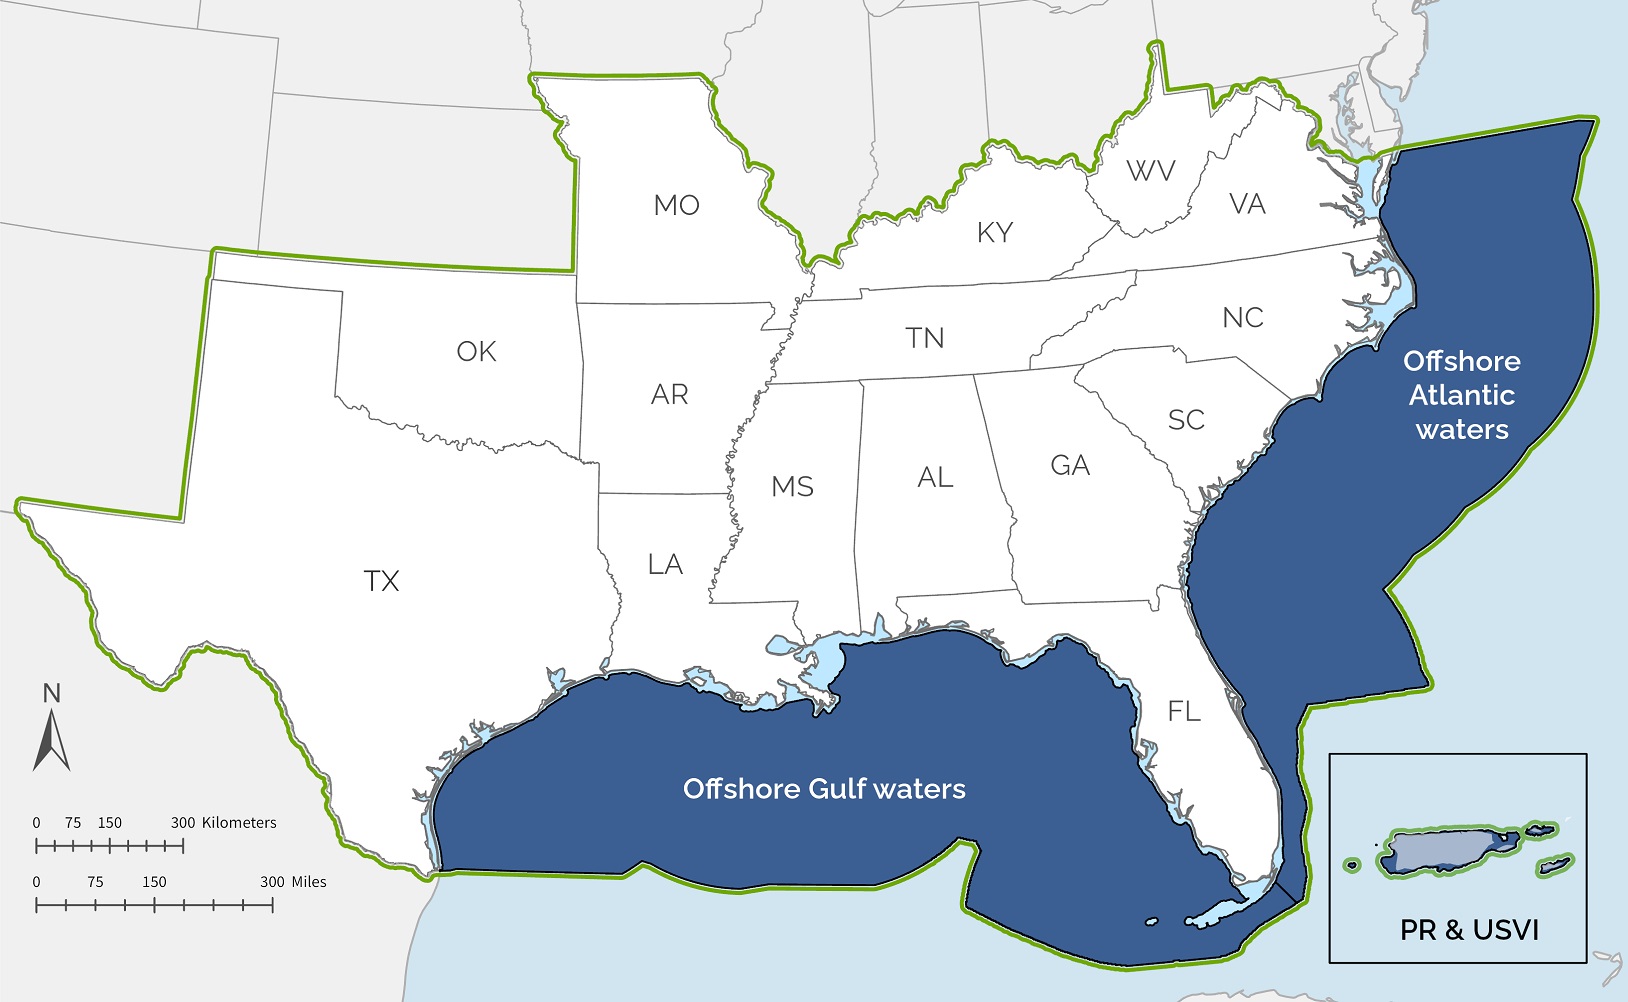 A map depicting the area covered by the Atlantic and Gulf marine workshops